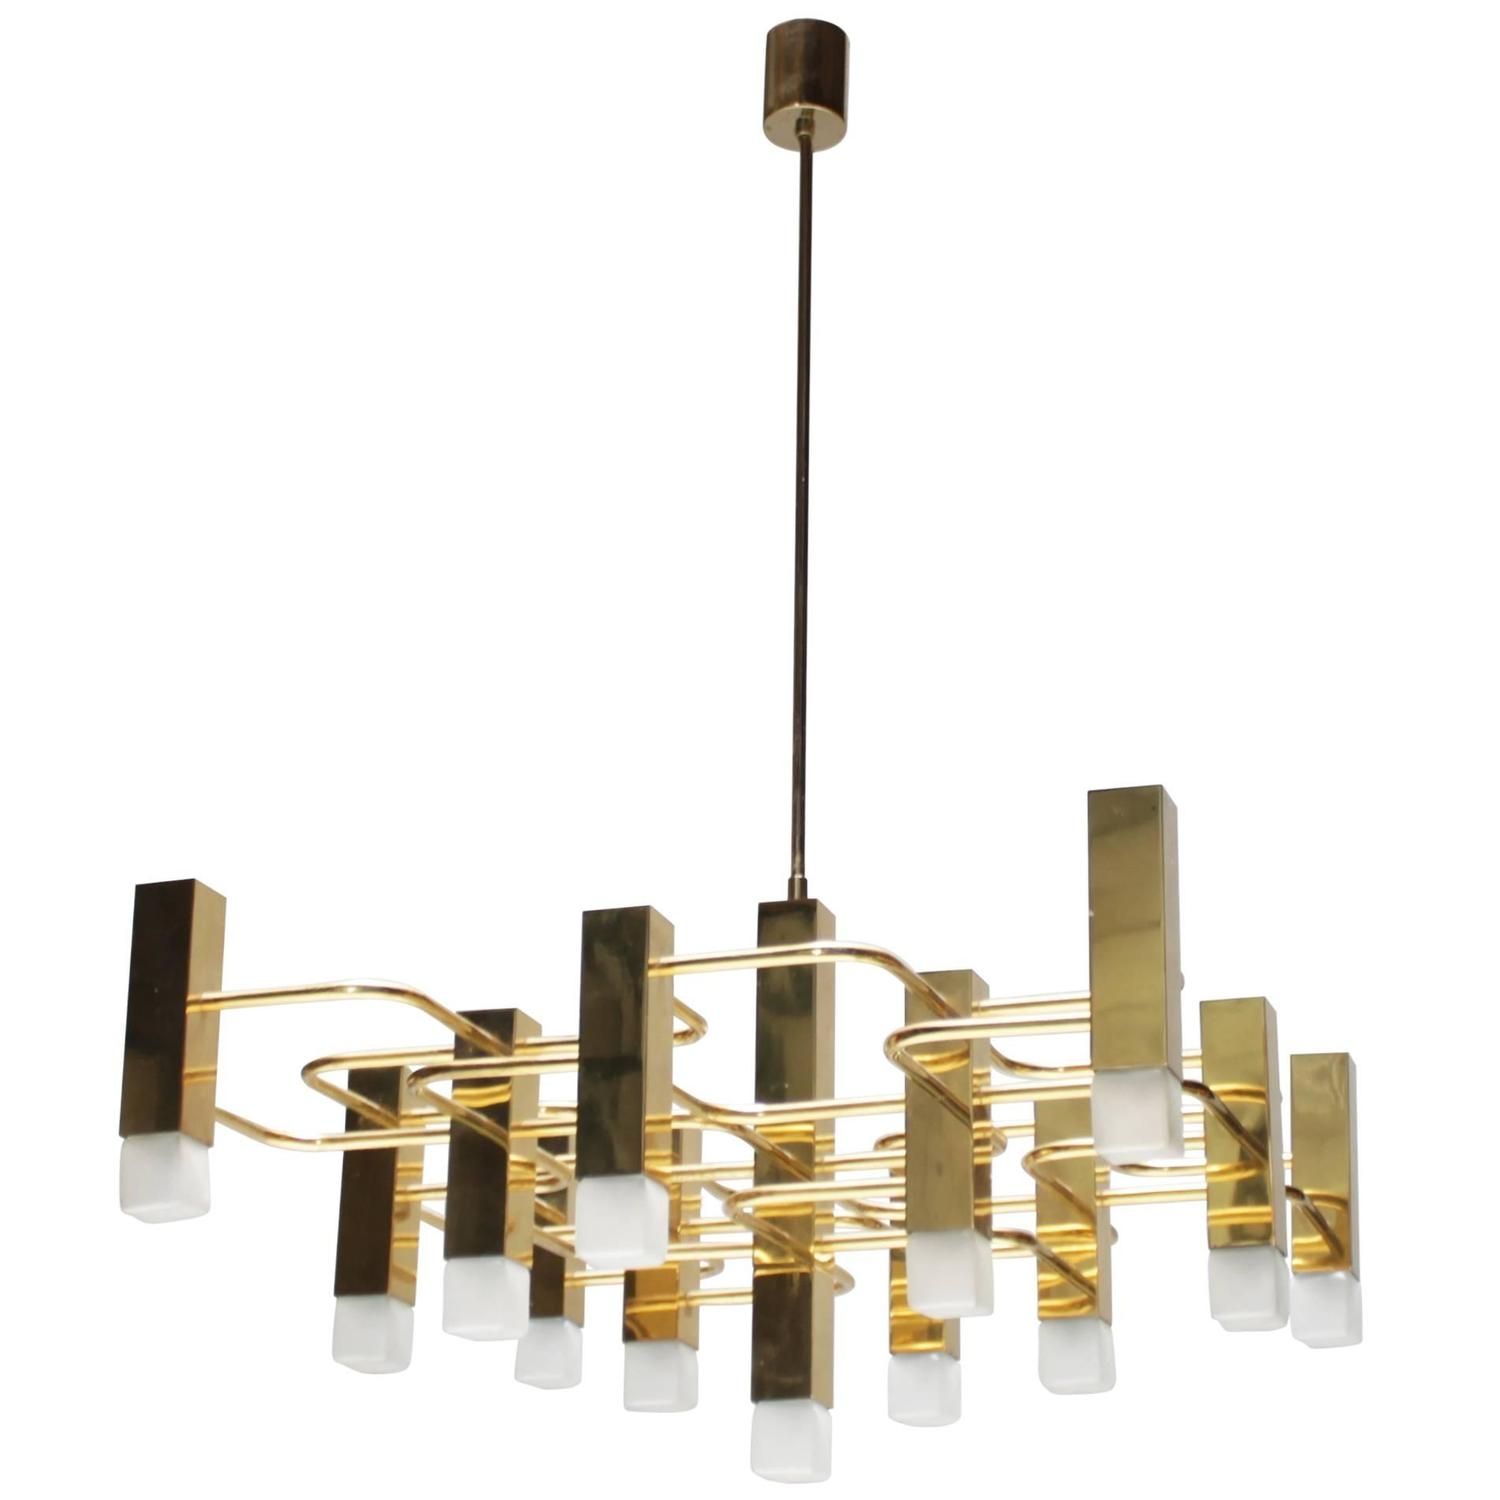 Large Brass Chandelier Sciolari For Boulanger For Sale At 1stdibs With Regard To Large Brass Chandelier (View 15 of 15)